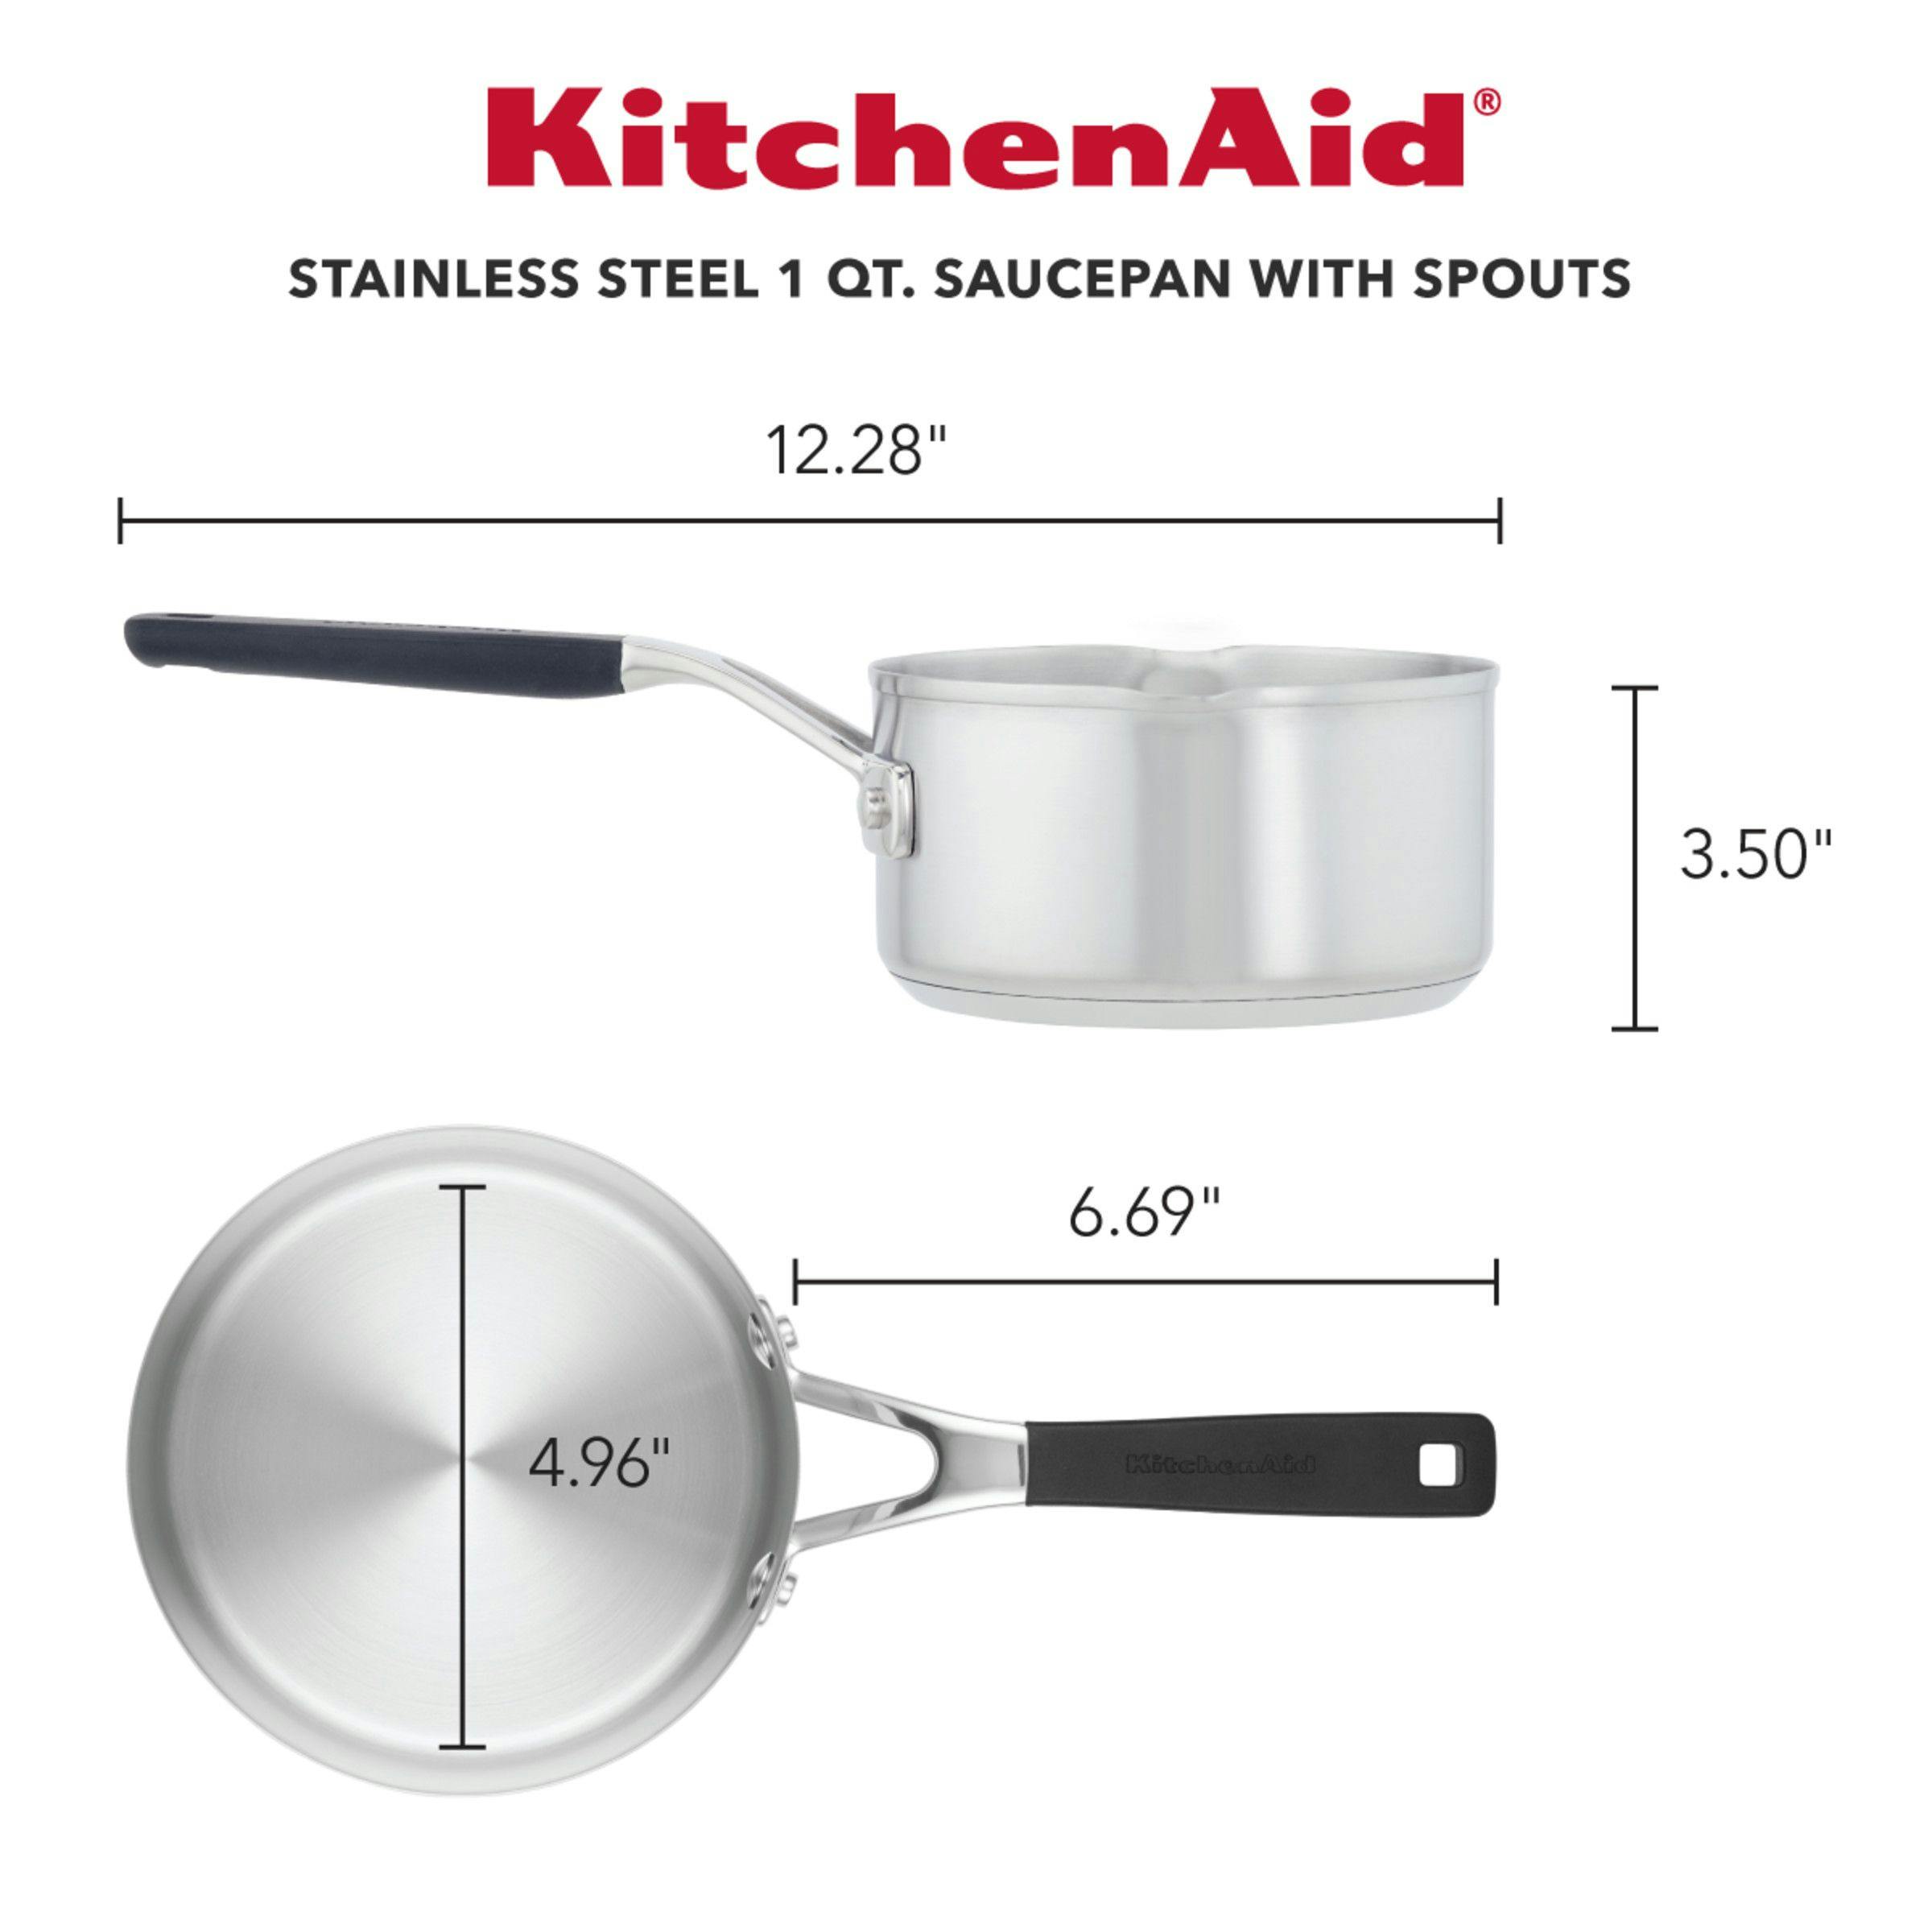 KitchenAid Stainless Steel Induction Saucepan with Pour Spouts, 1-Quart, Brushed Stainless Steel